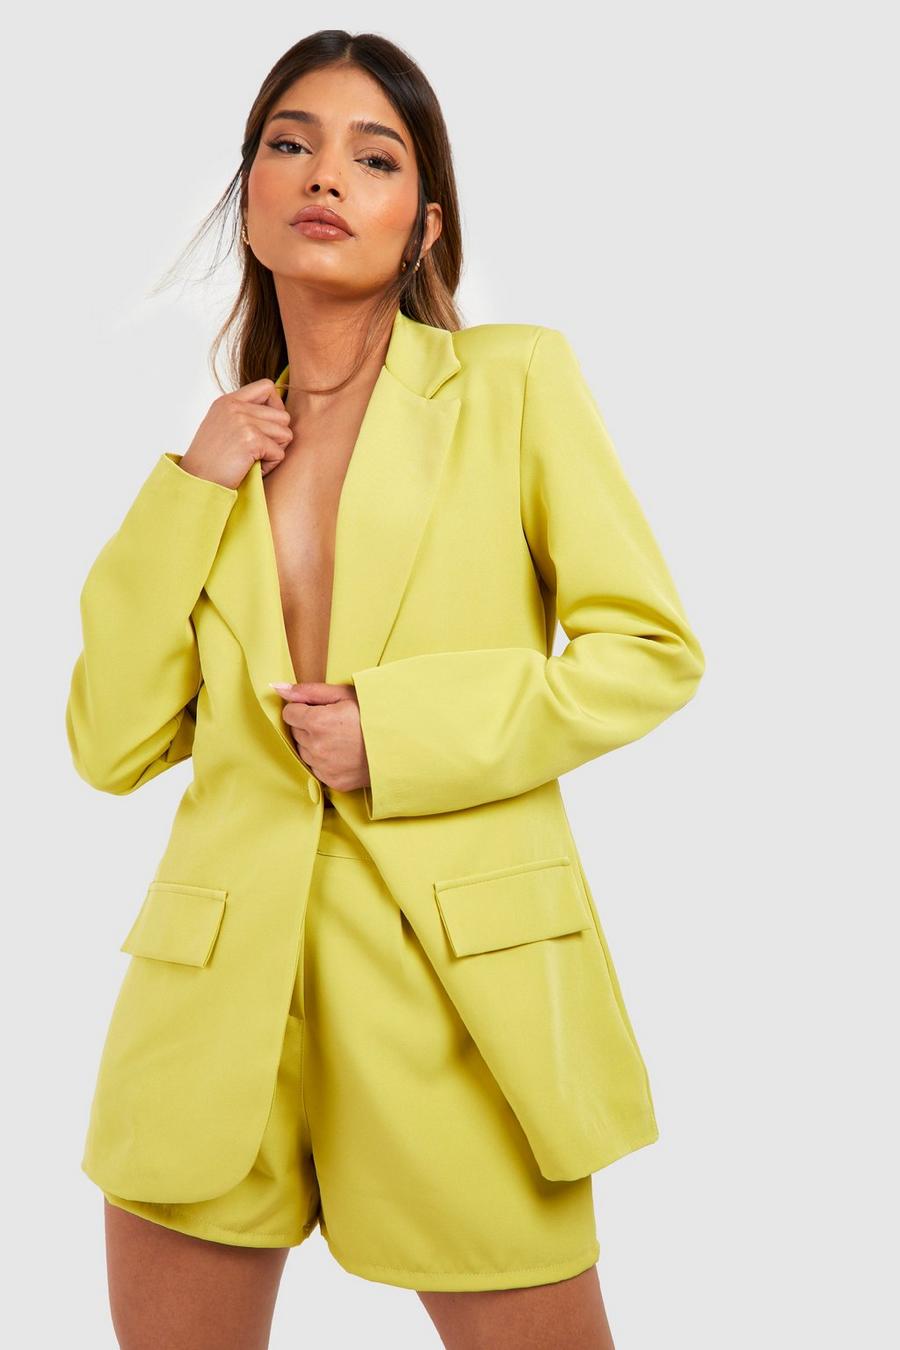 Soft lime yellow Plunge Front Fitted Tailored Blazer